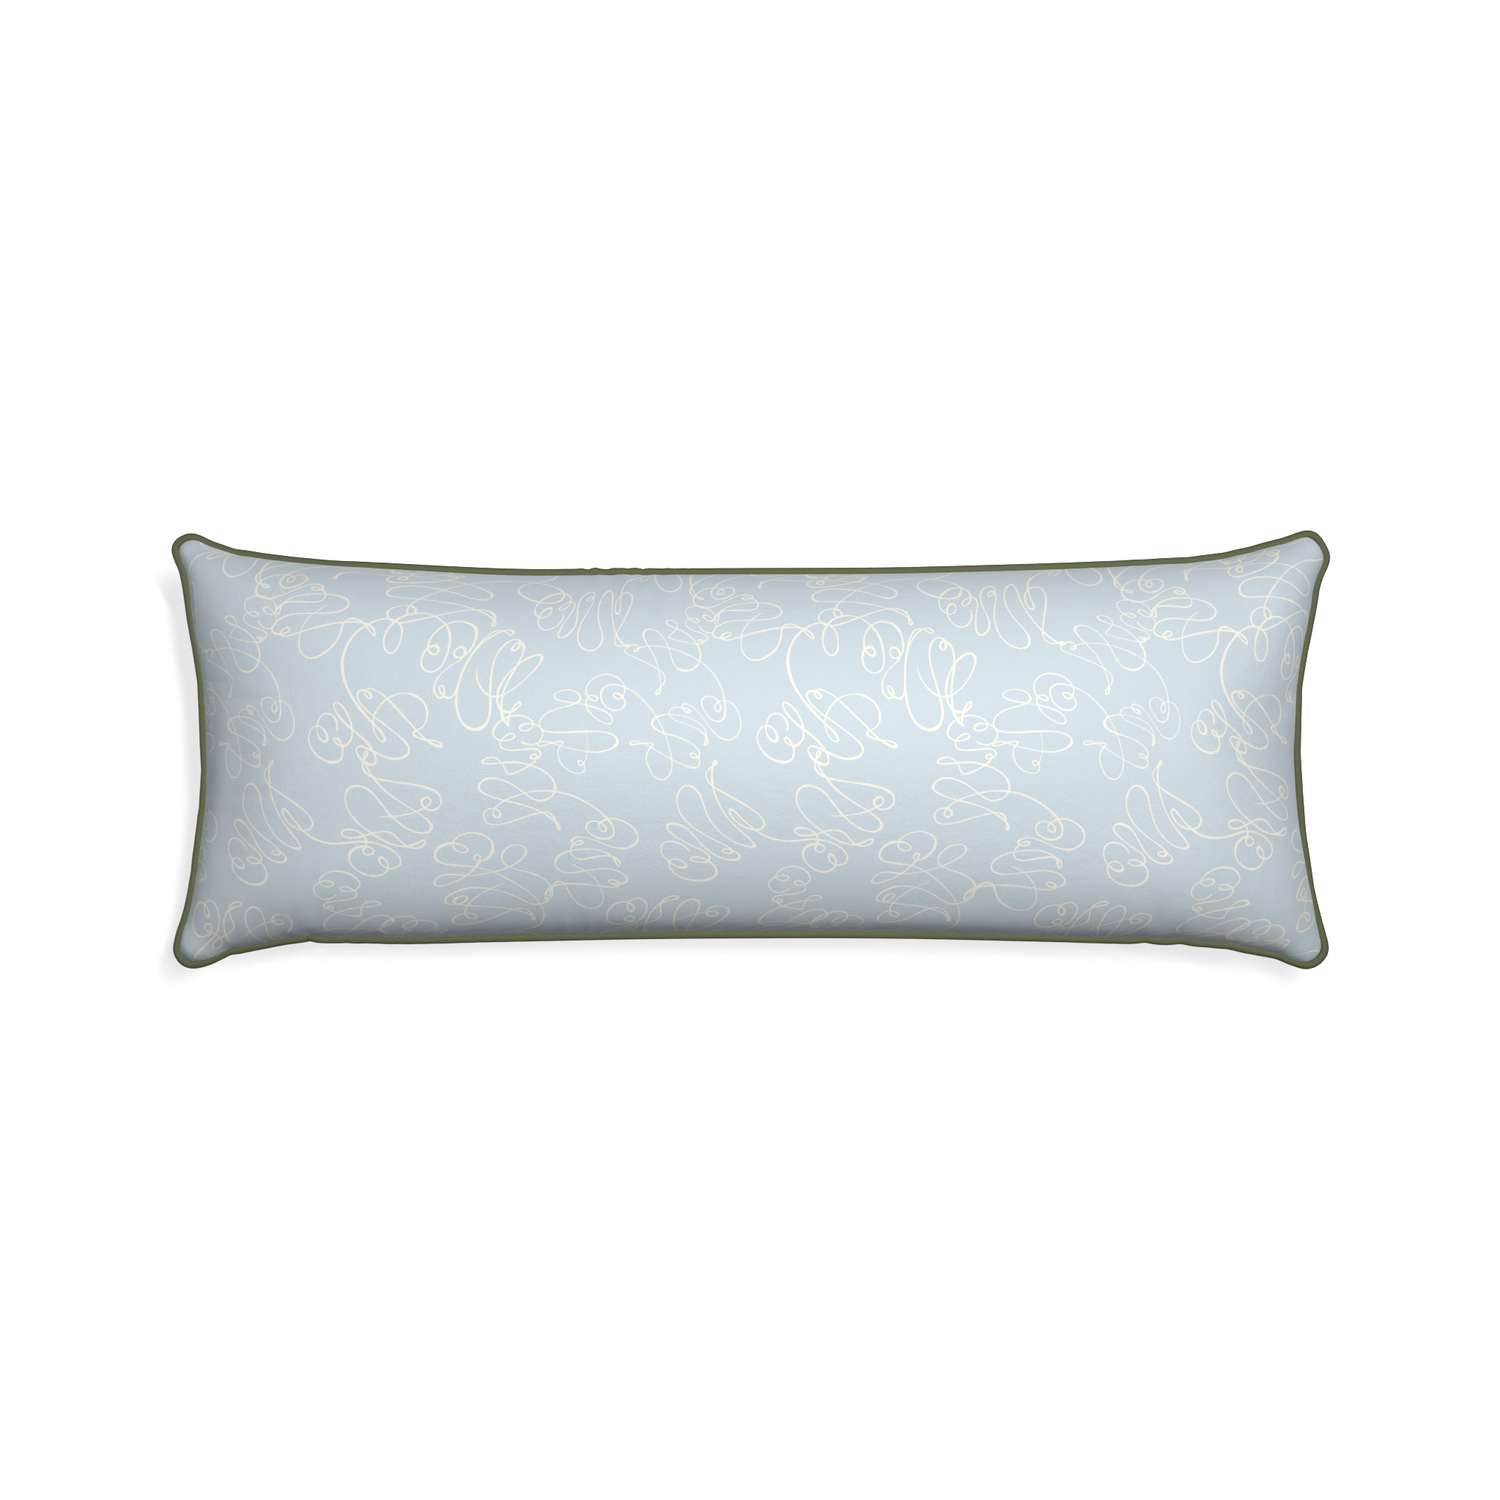 Xl-lumbar mirabella custom pillow with f piping on white background